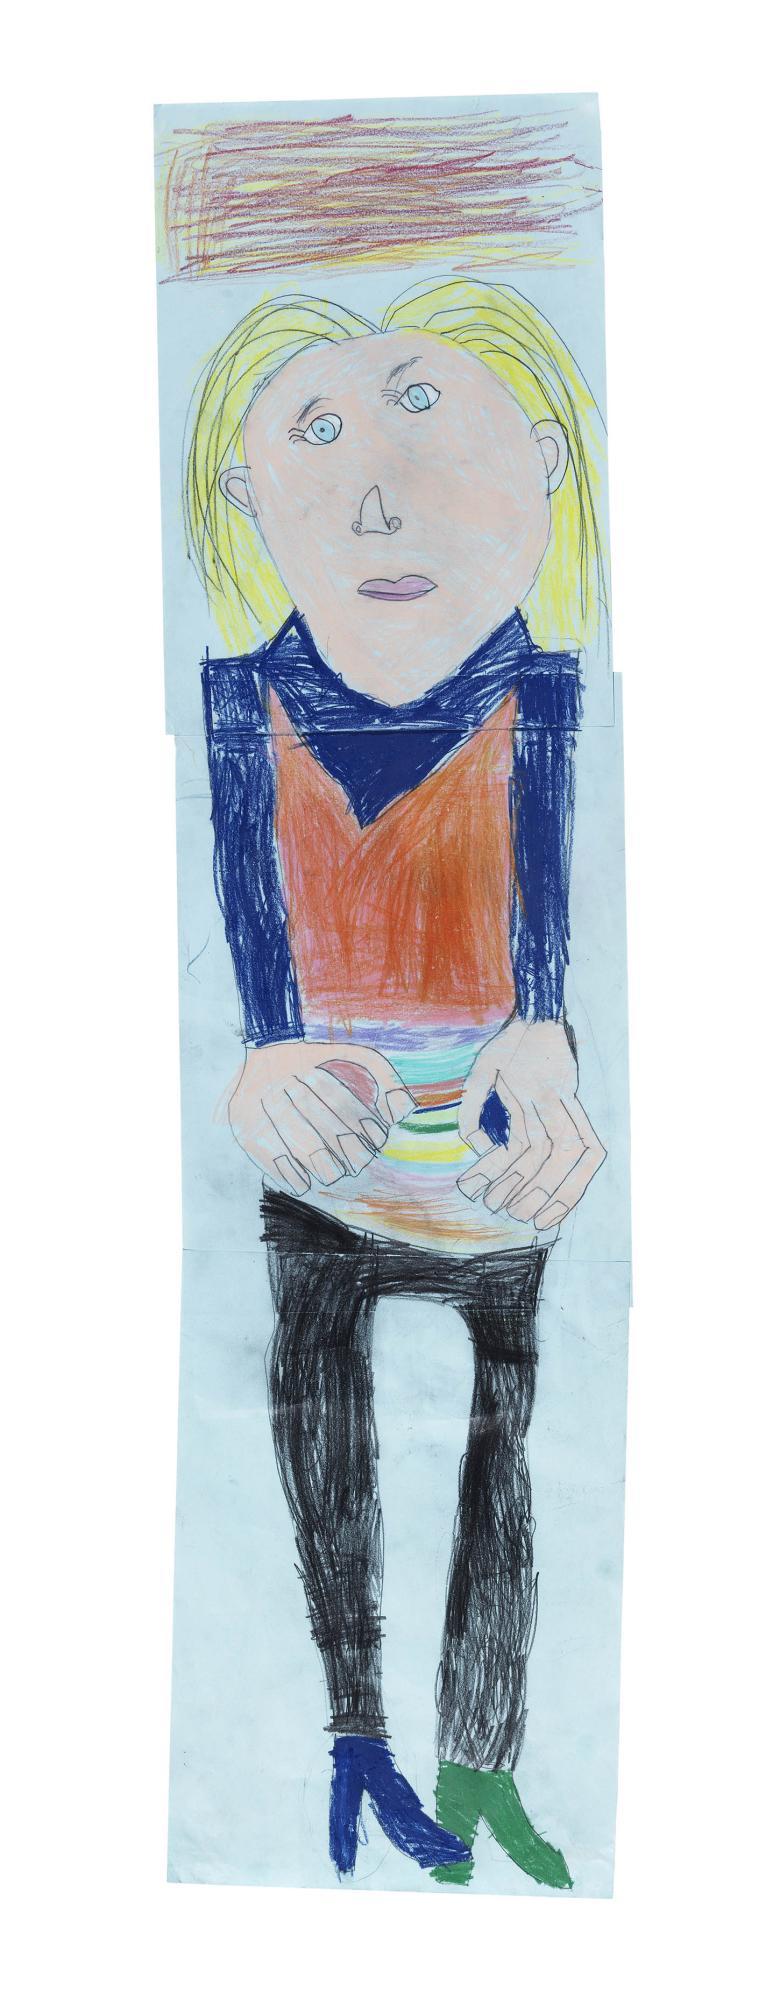 Child's drawing of a full-length portrait of a woman with blond hair drawn on a tall, skinny piece of paper